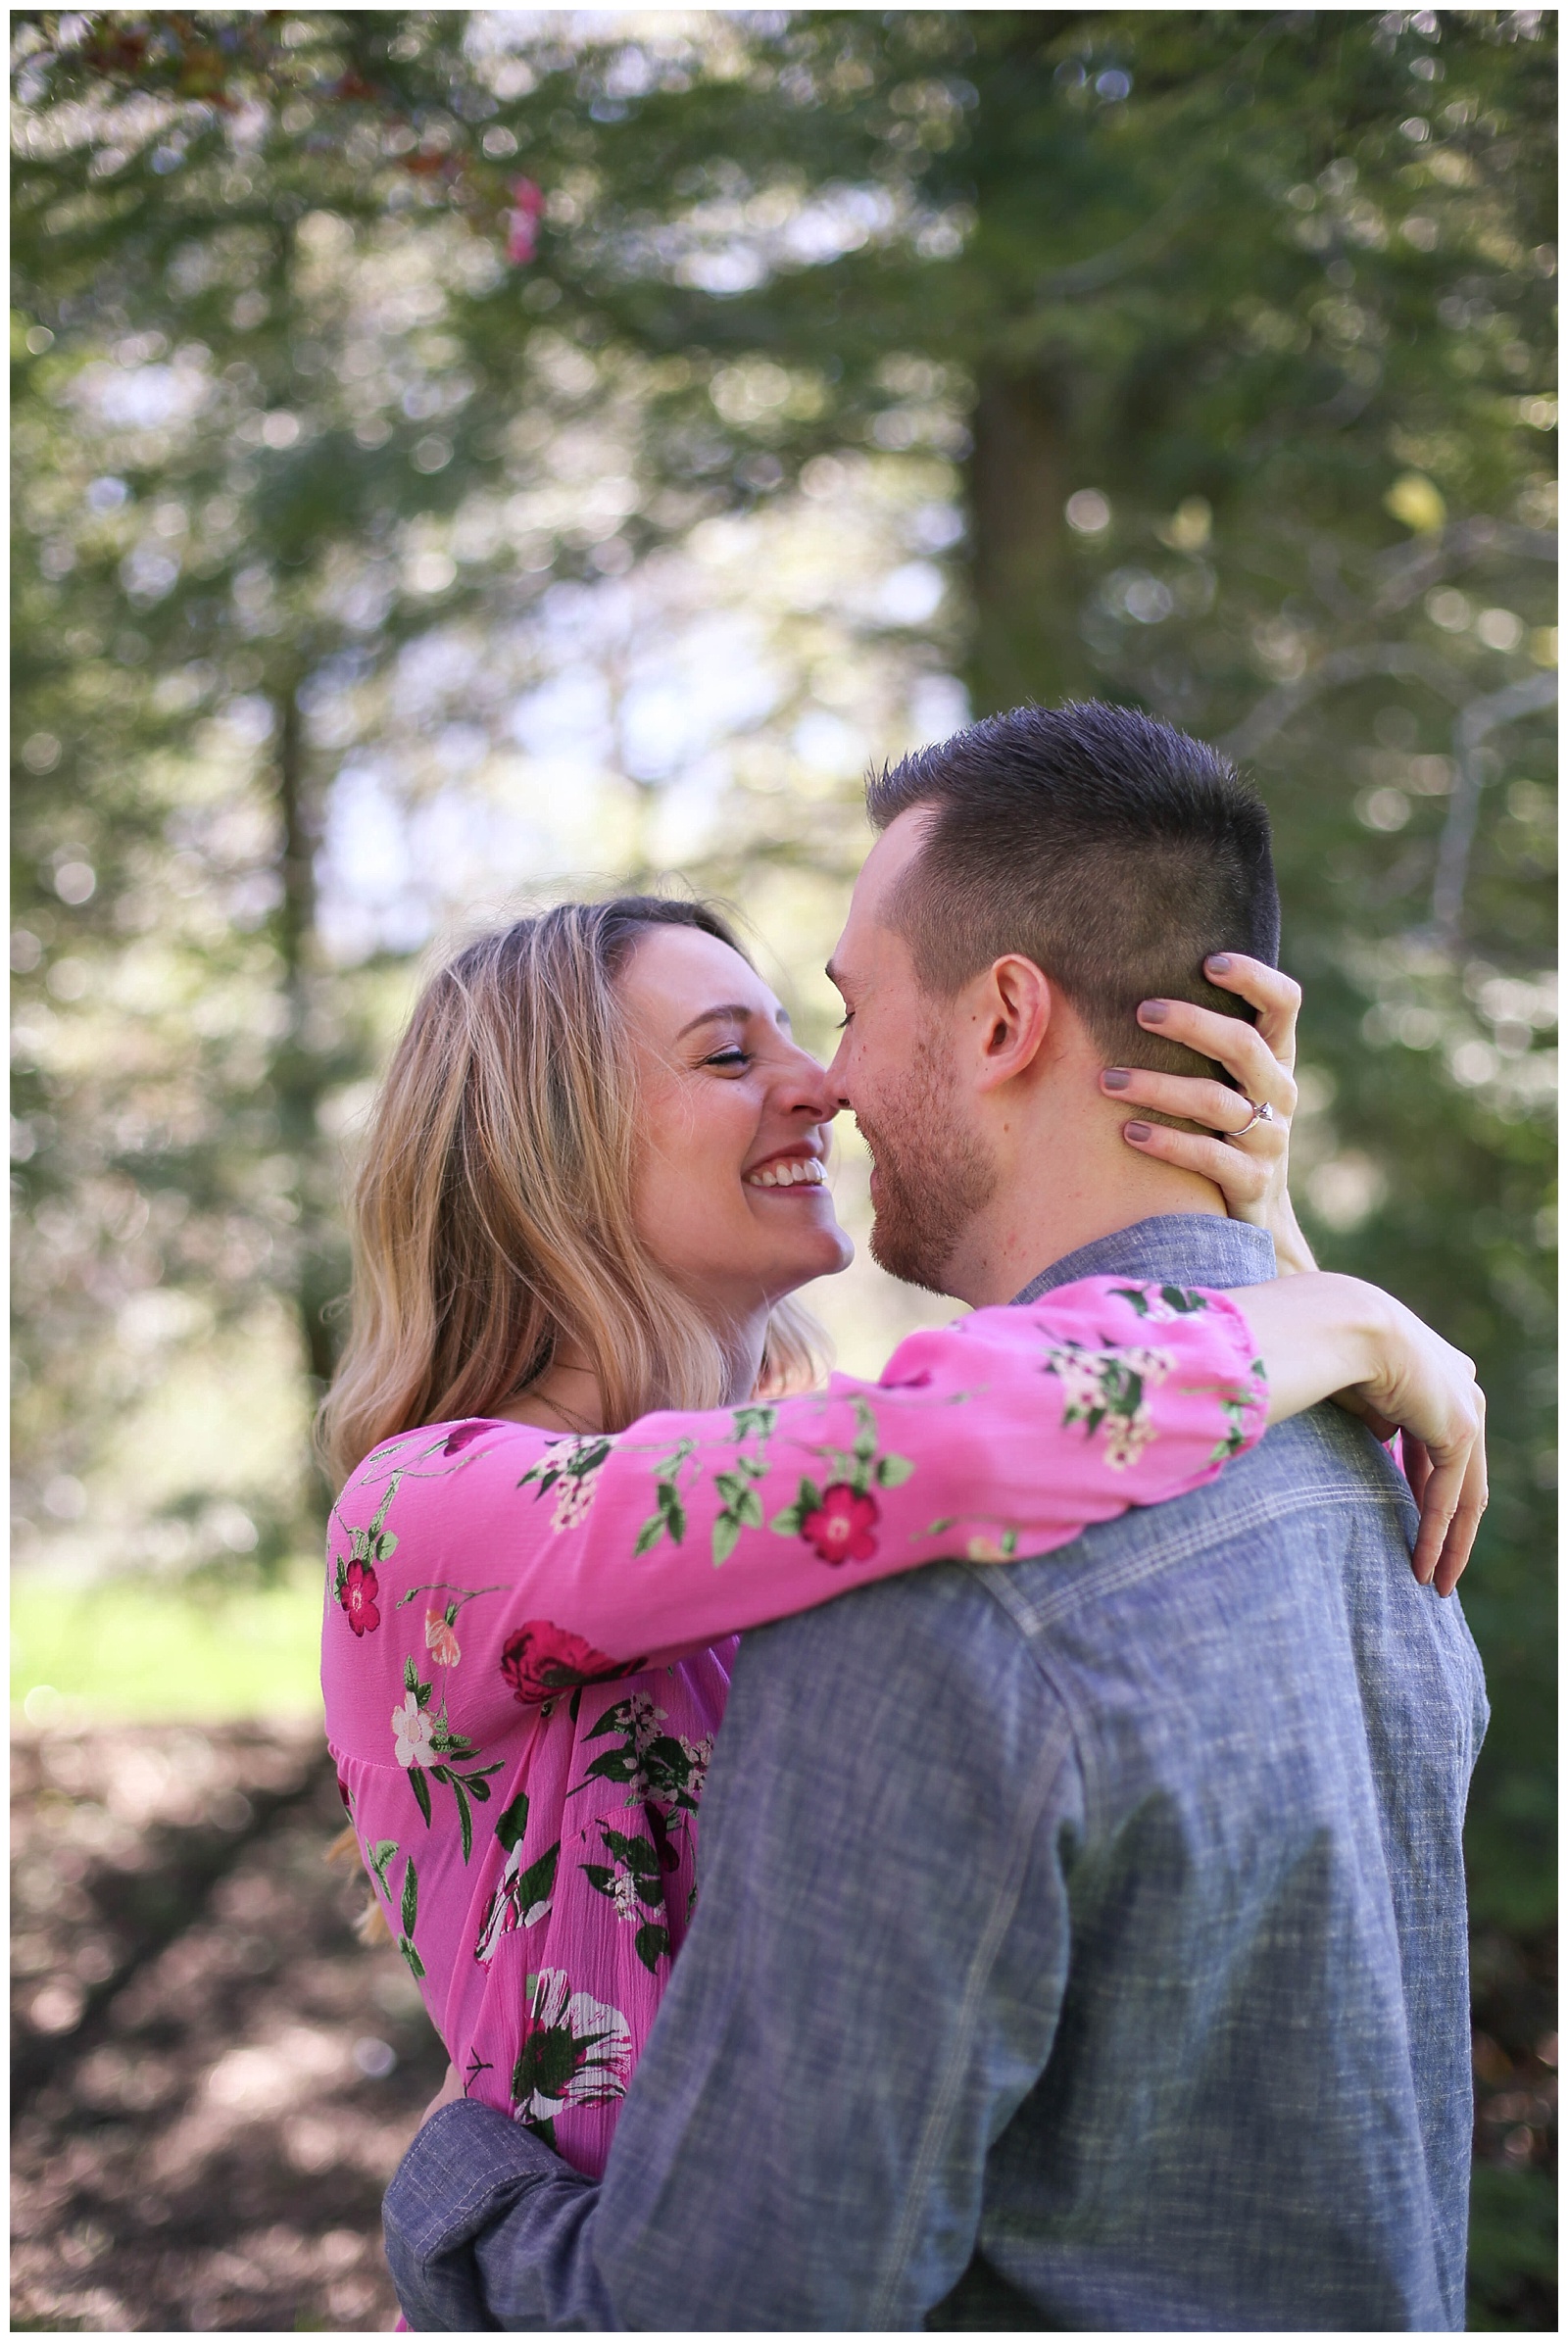 Dayton, Ohio Engagement Session | Monica Brown Photography | monicabrownphoto.com